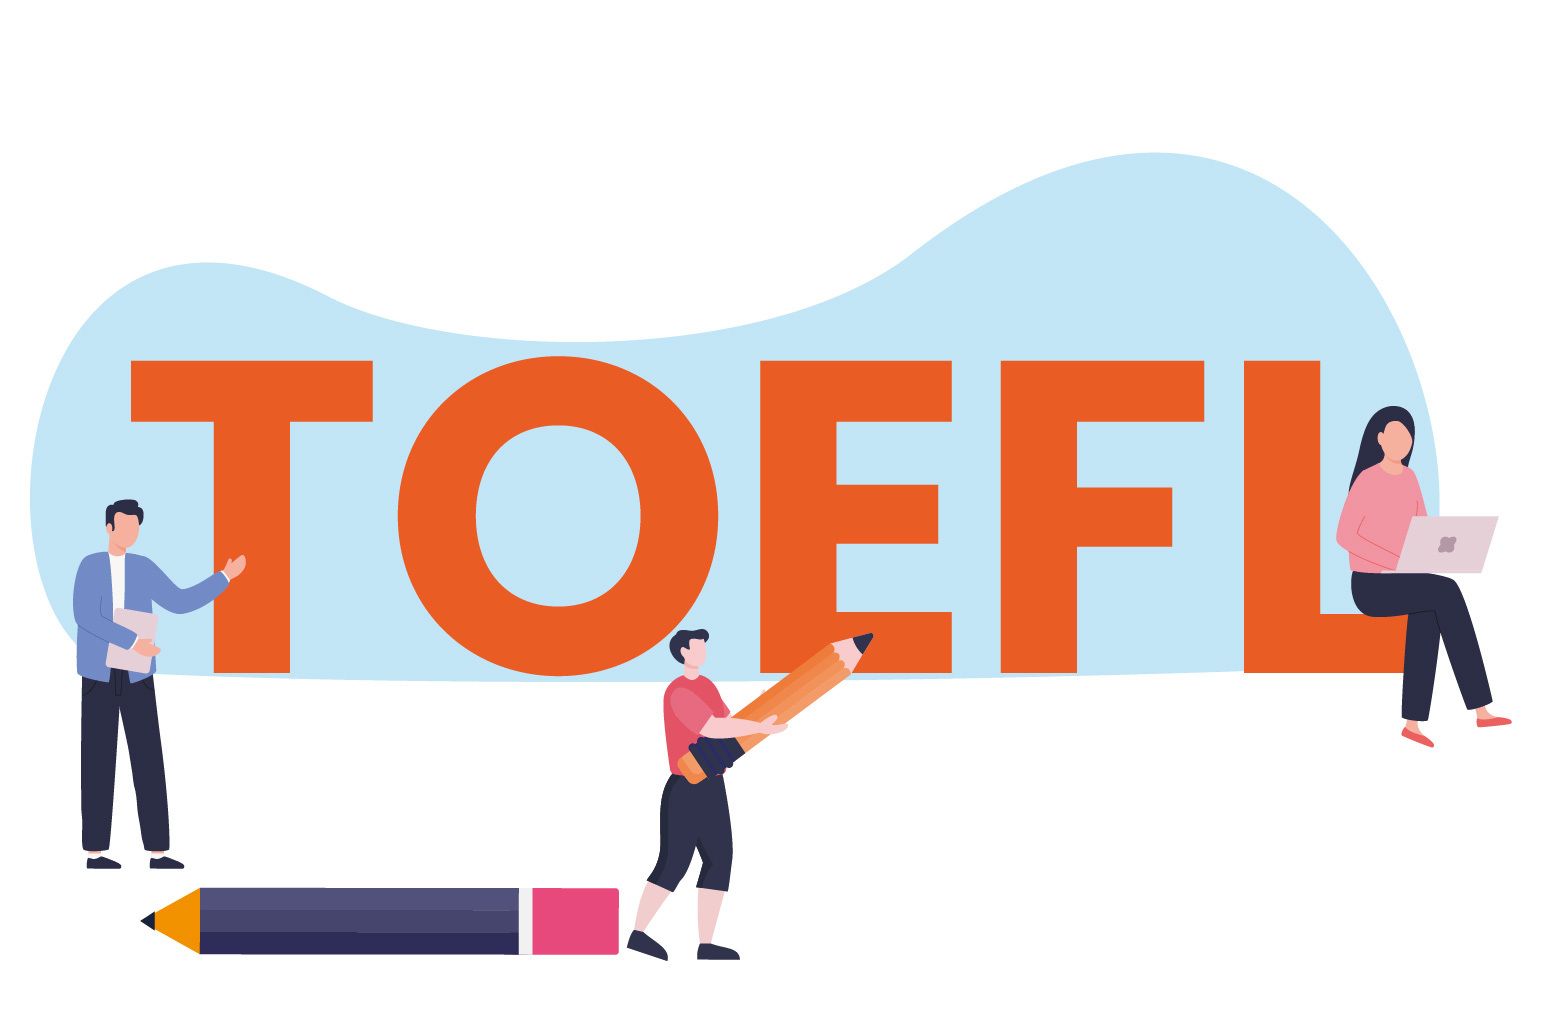 How Can I Study Myself for Toefl?